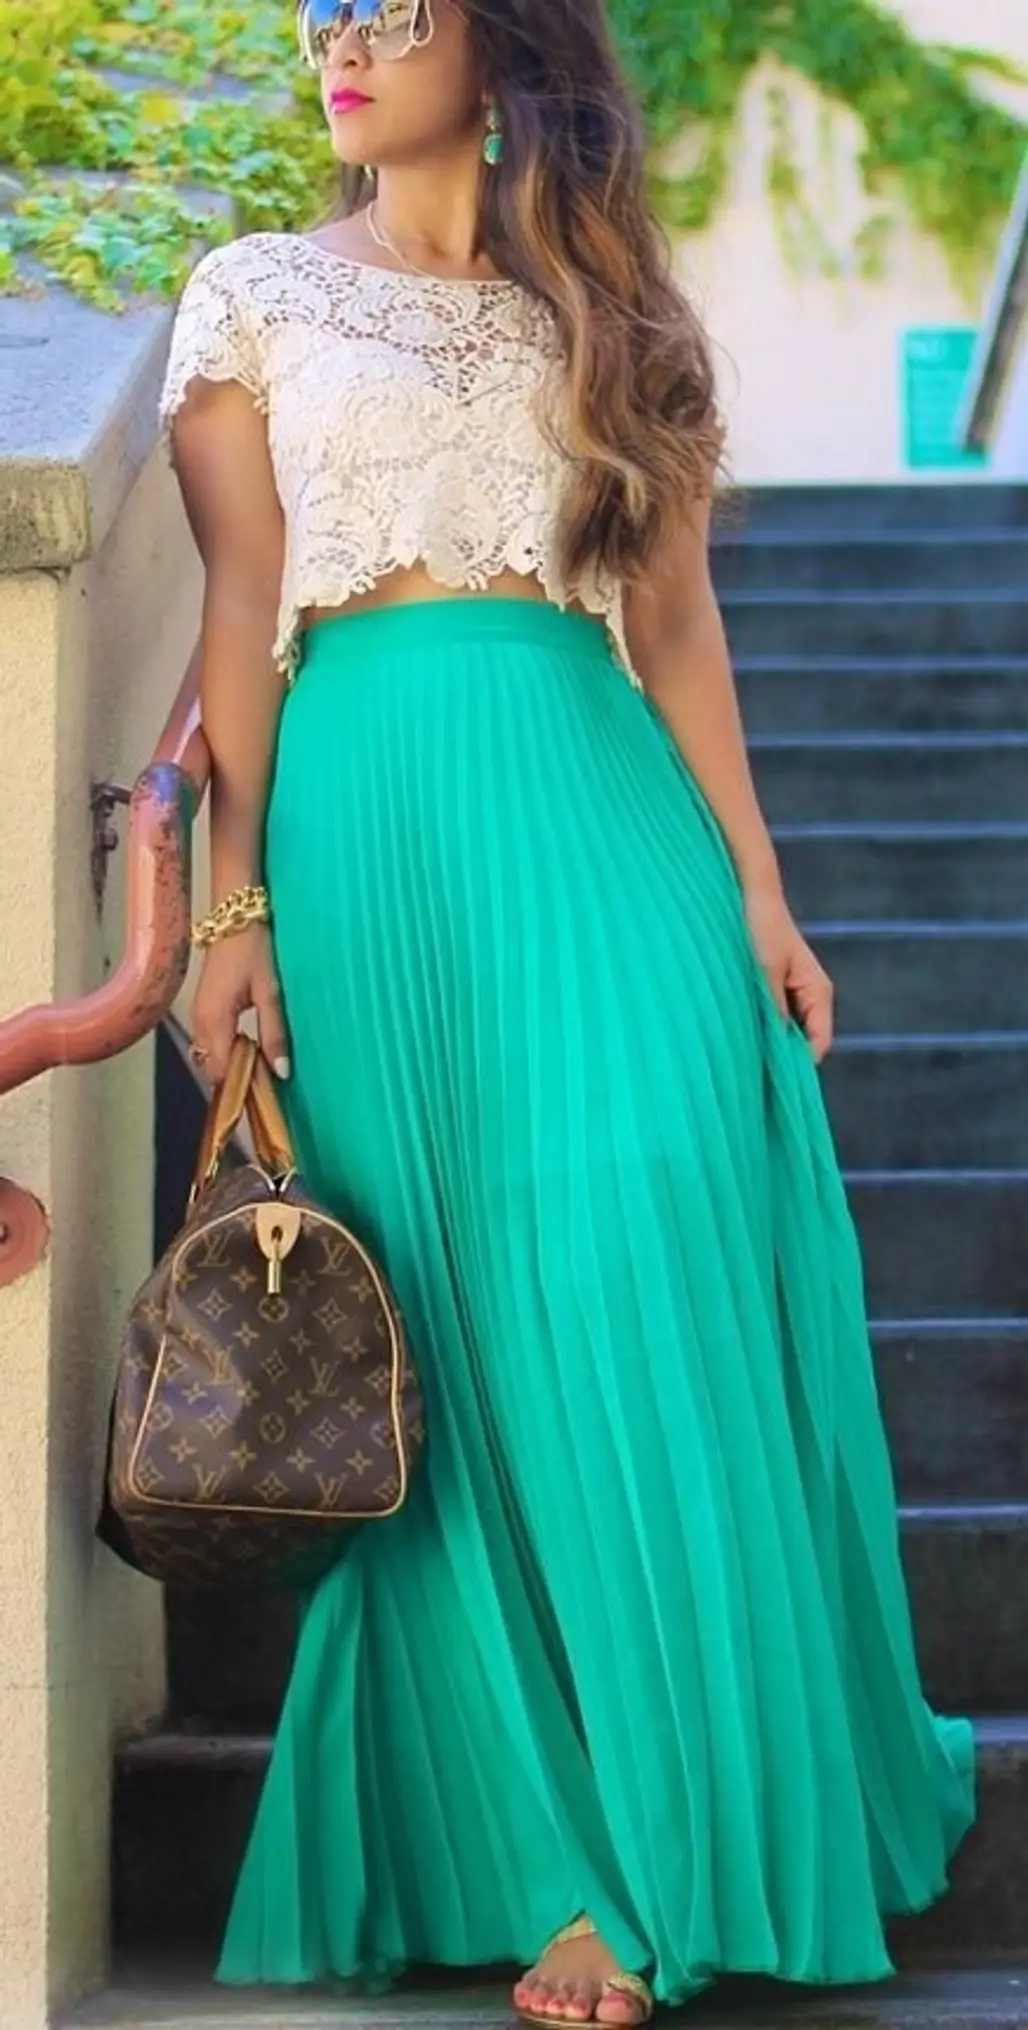 Wear Your Maxi Skirt with a Crop Top